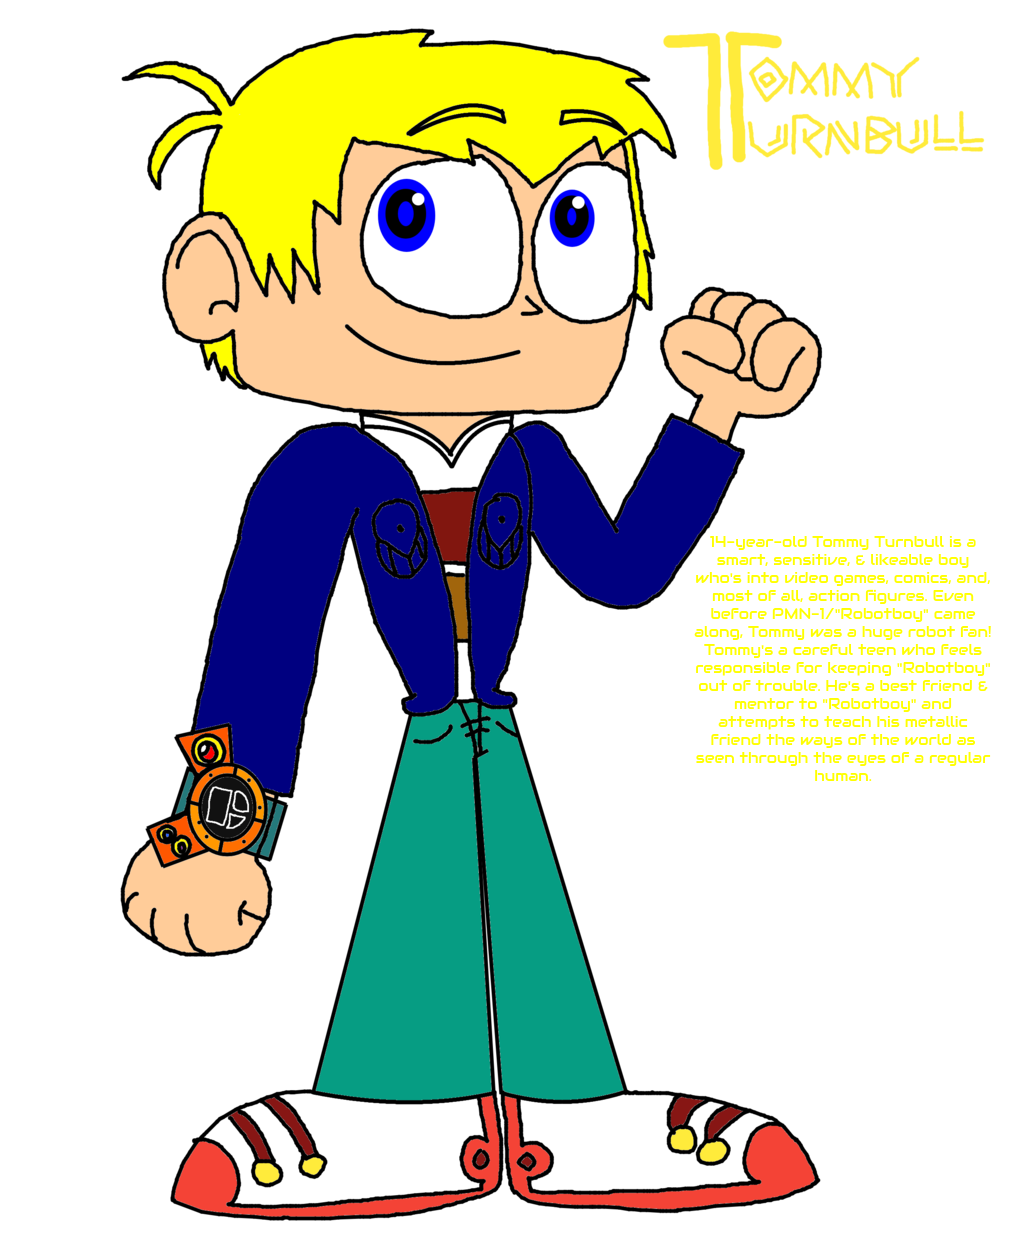 The Robotboy Movie: Tommy by 3dmarioworld on DeviantArt